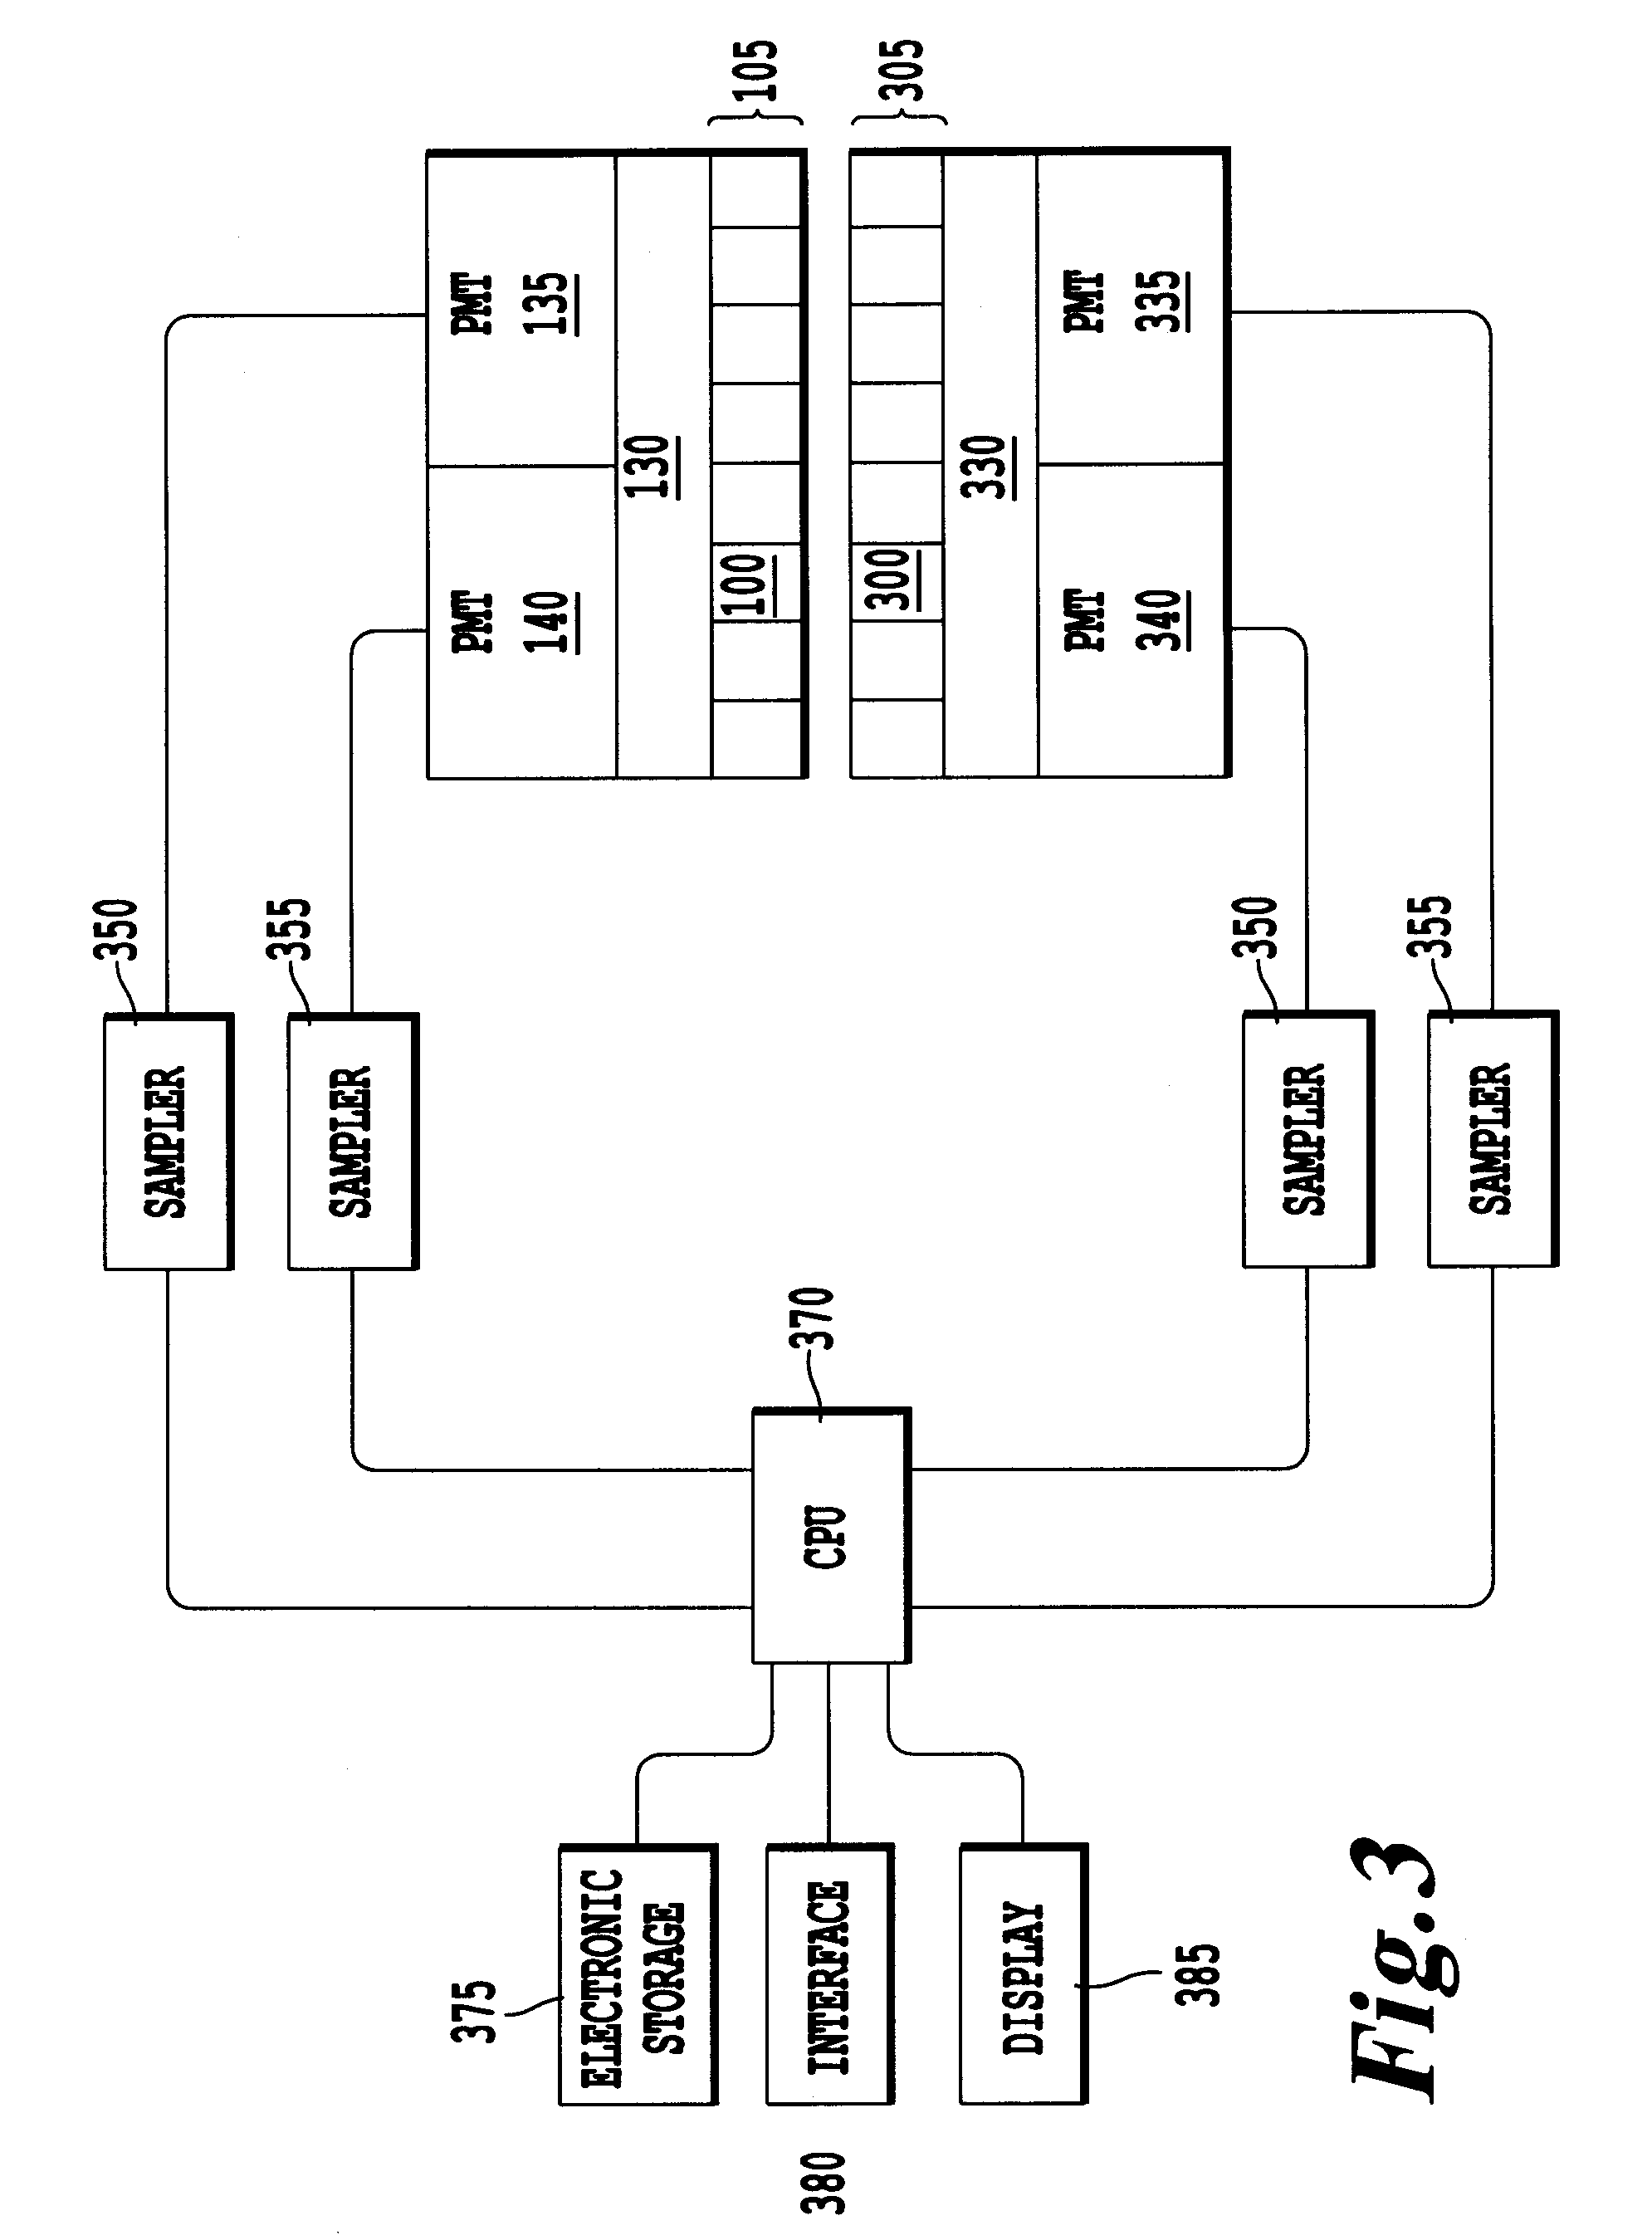 Apparatus and associated methodology for improving timing resolution in gamma ray detection